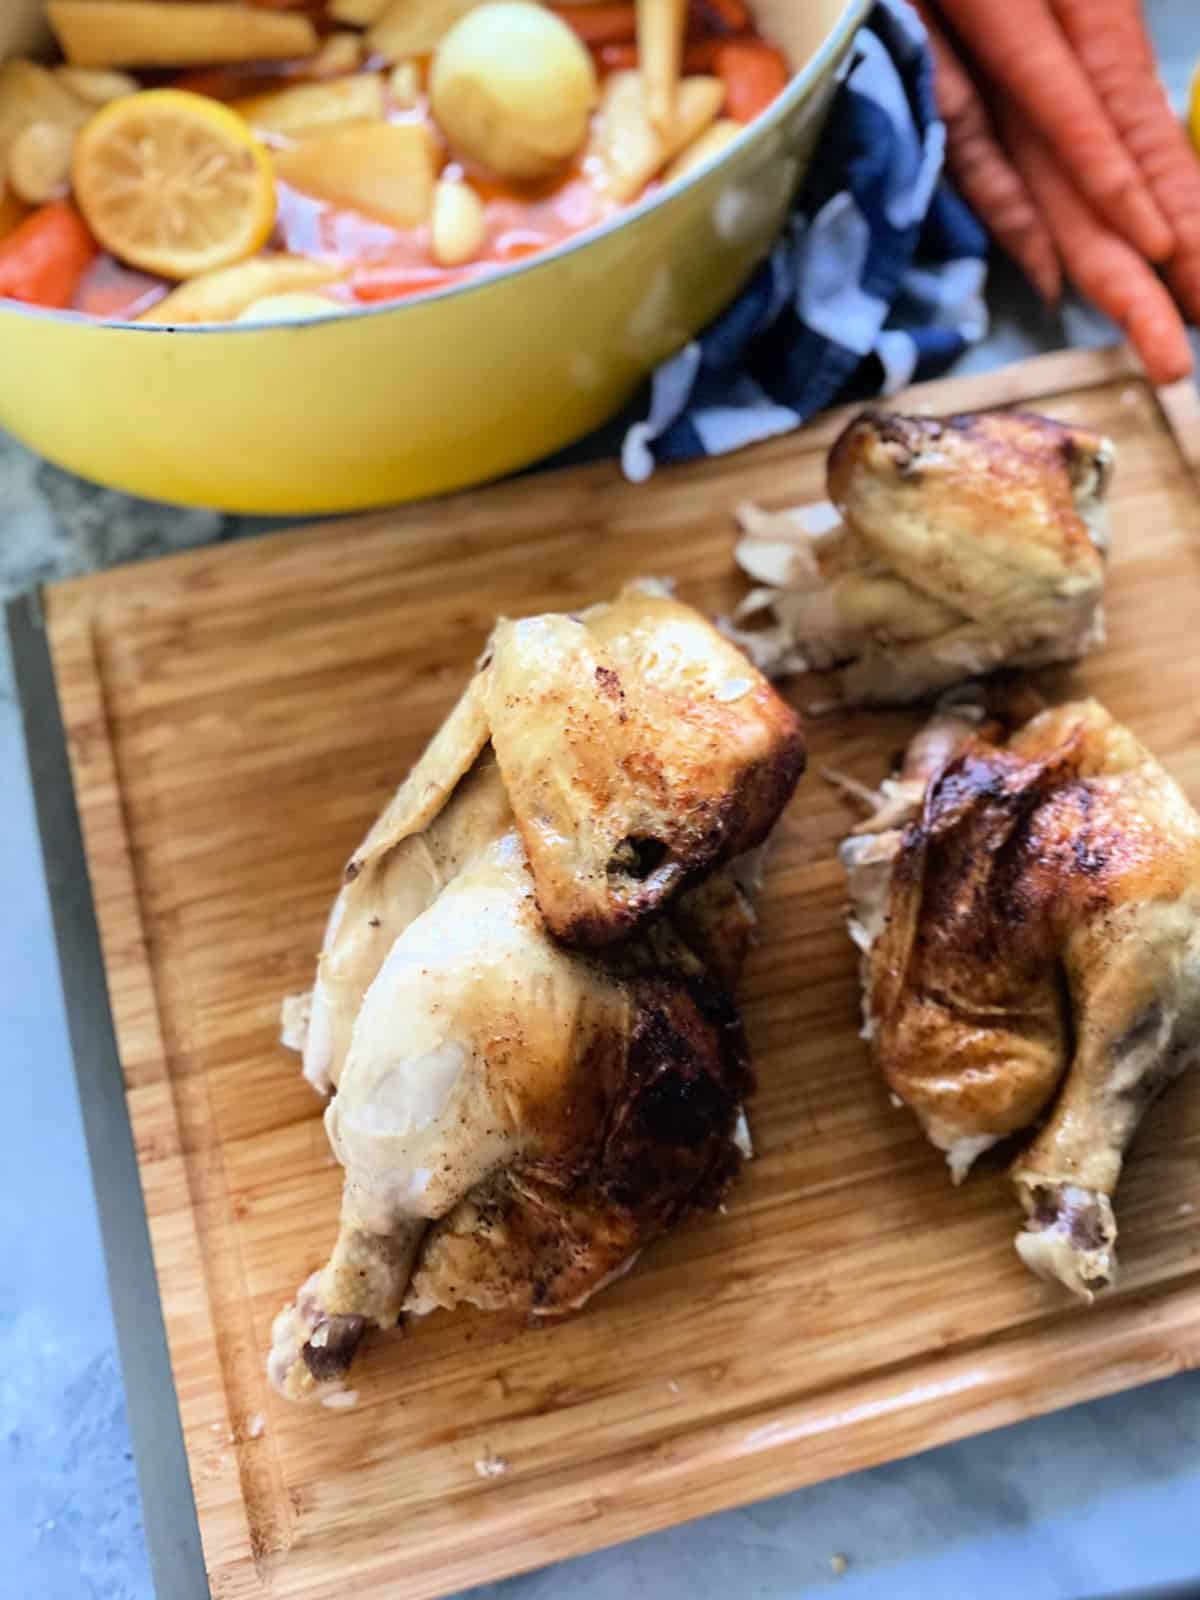 Wood cutting board with whole chicken cut into pieces.